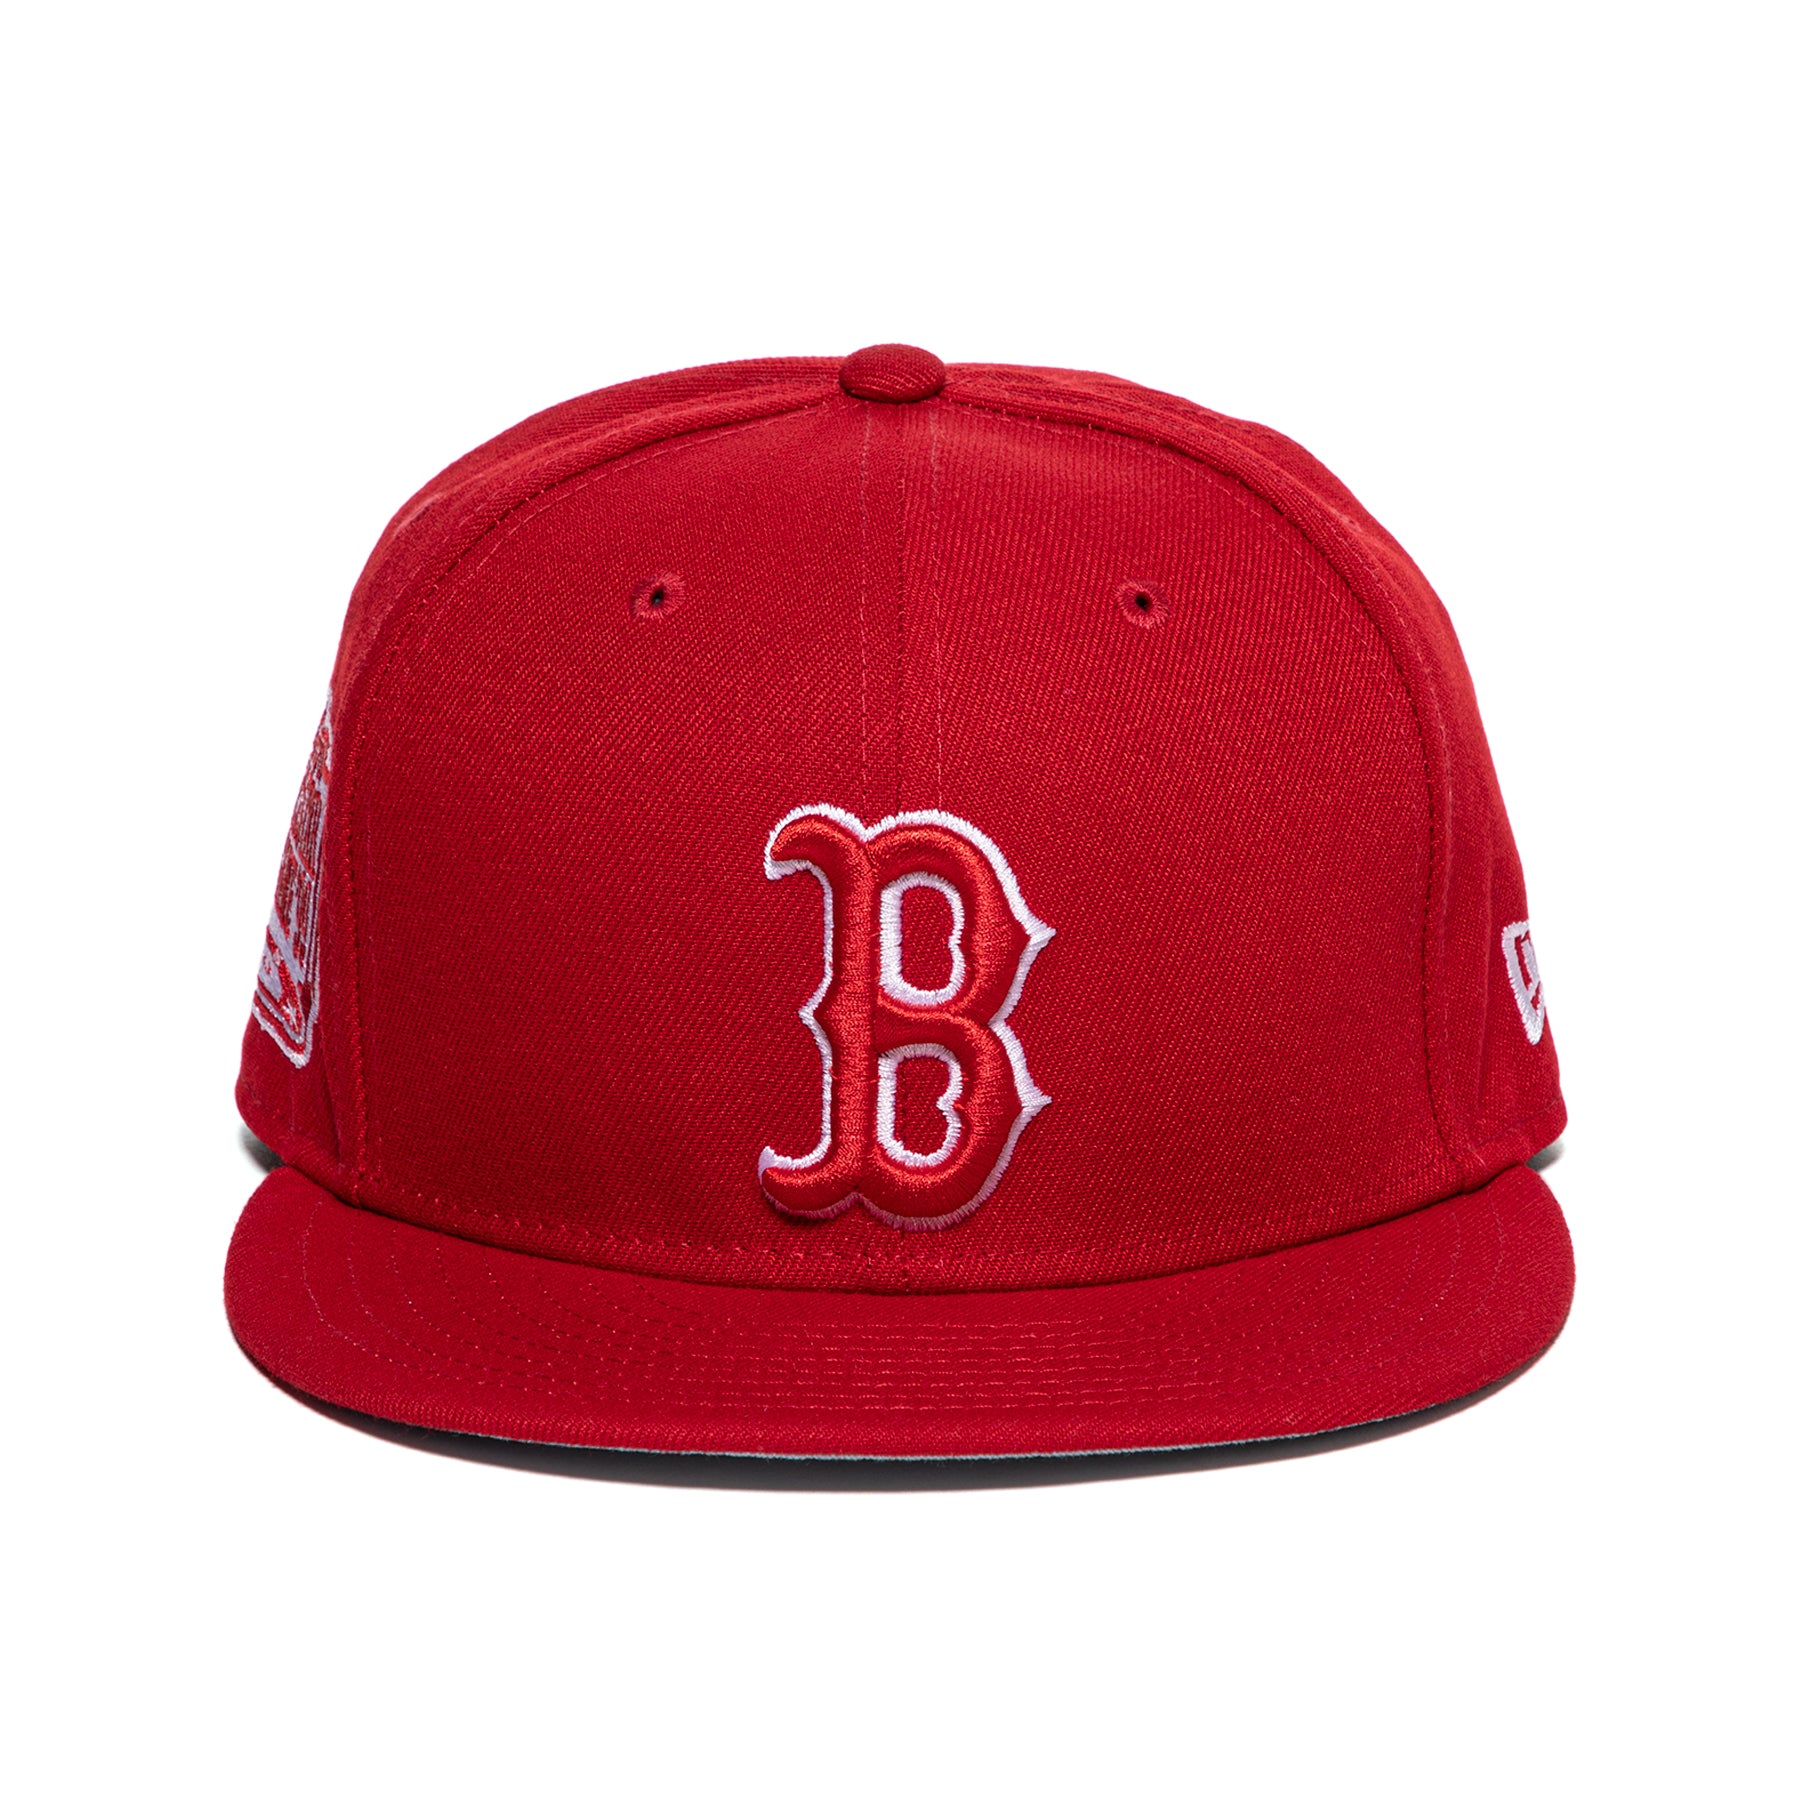 New Era Boston Red Sox All-Star Game 59Fifty Fitted Hat (Scarlet)